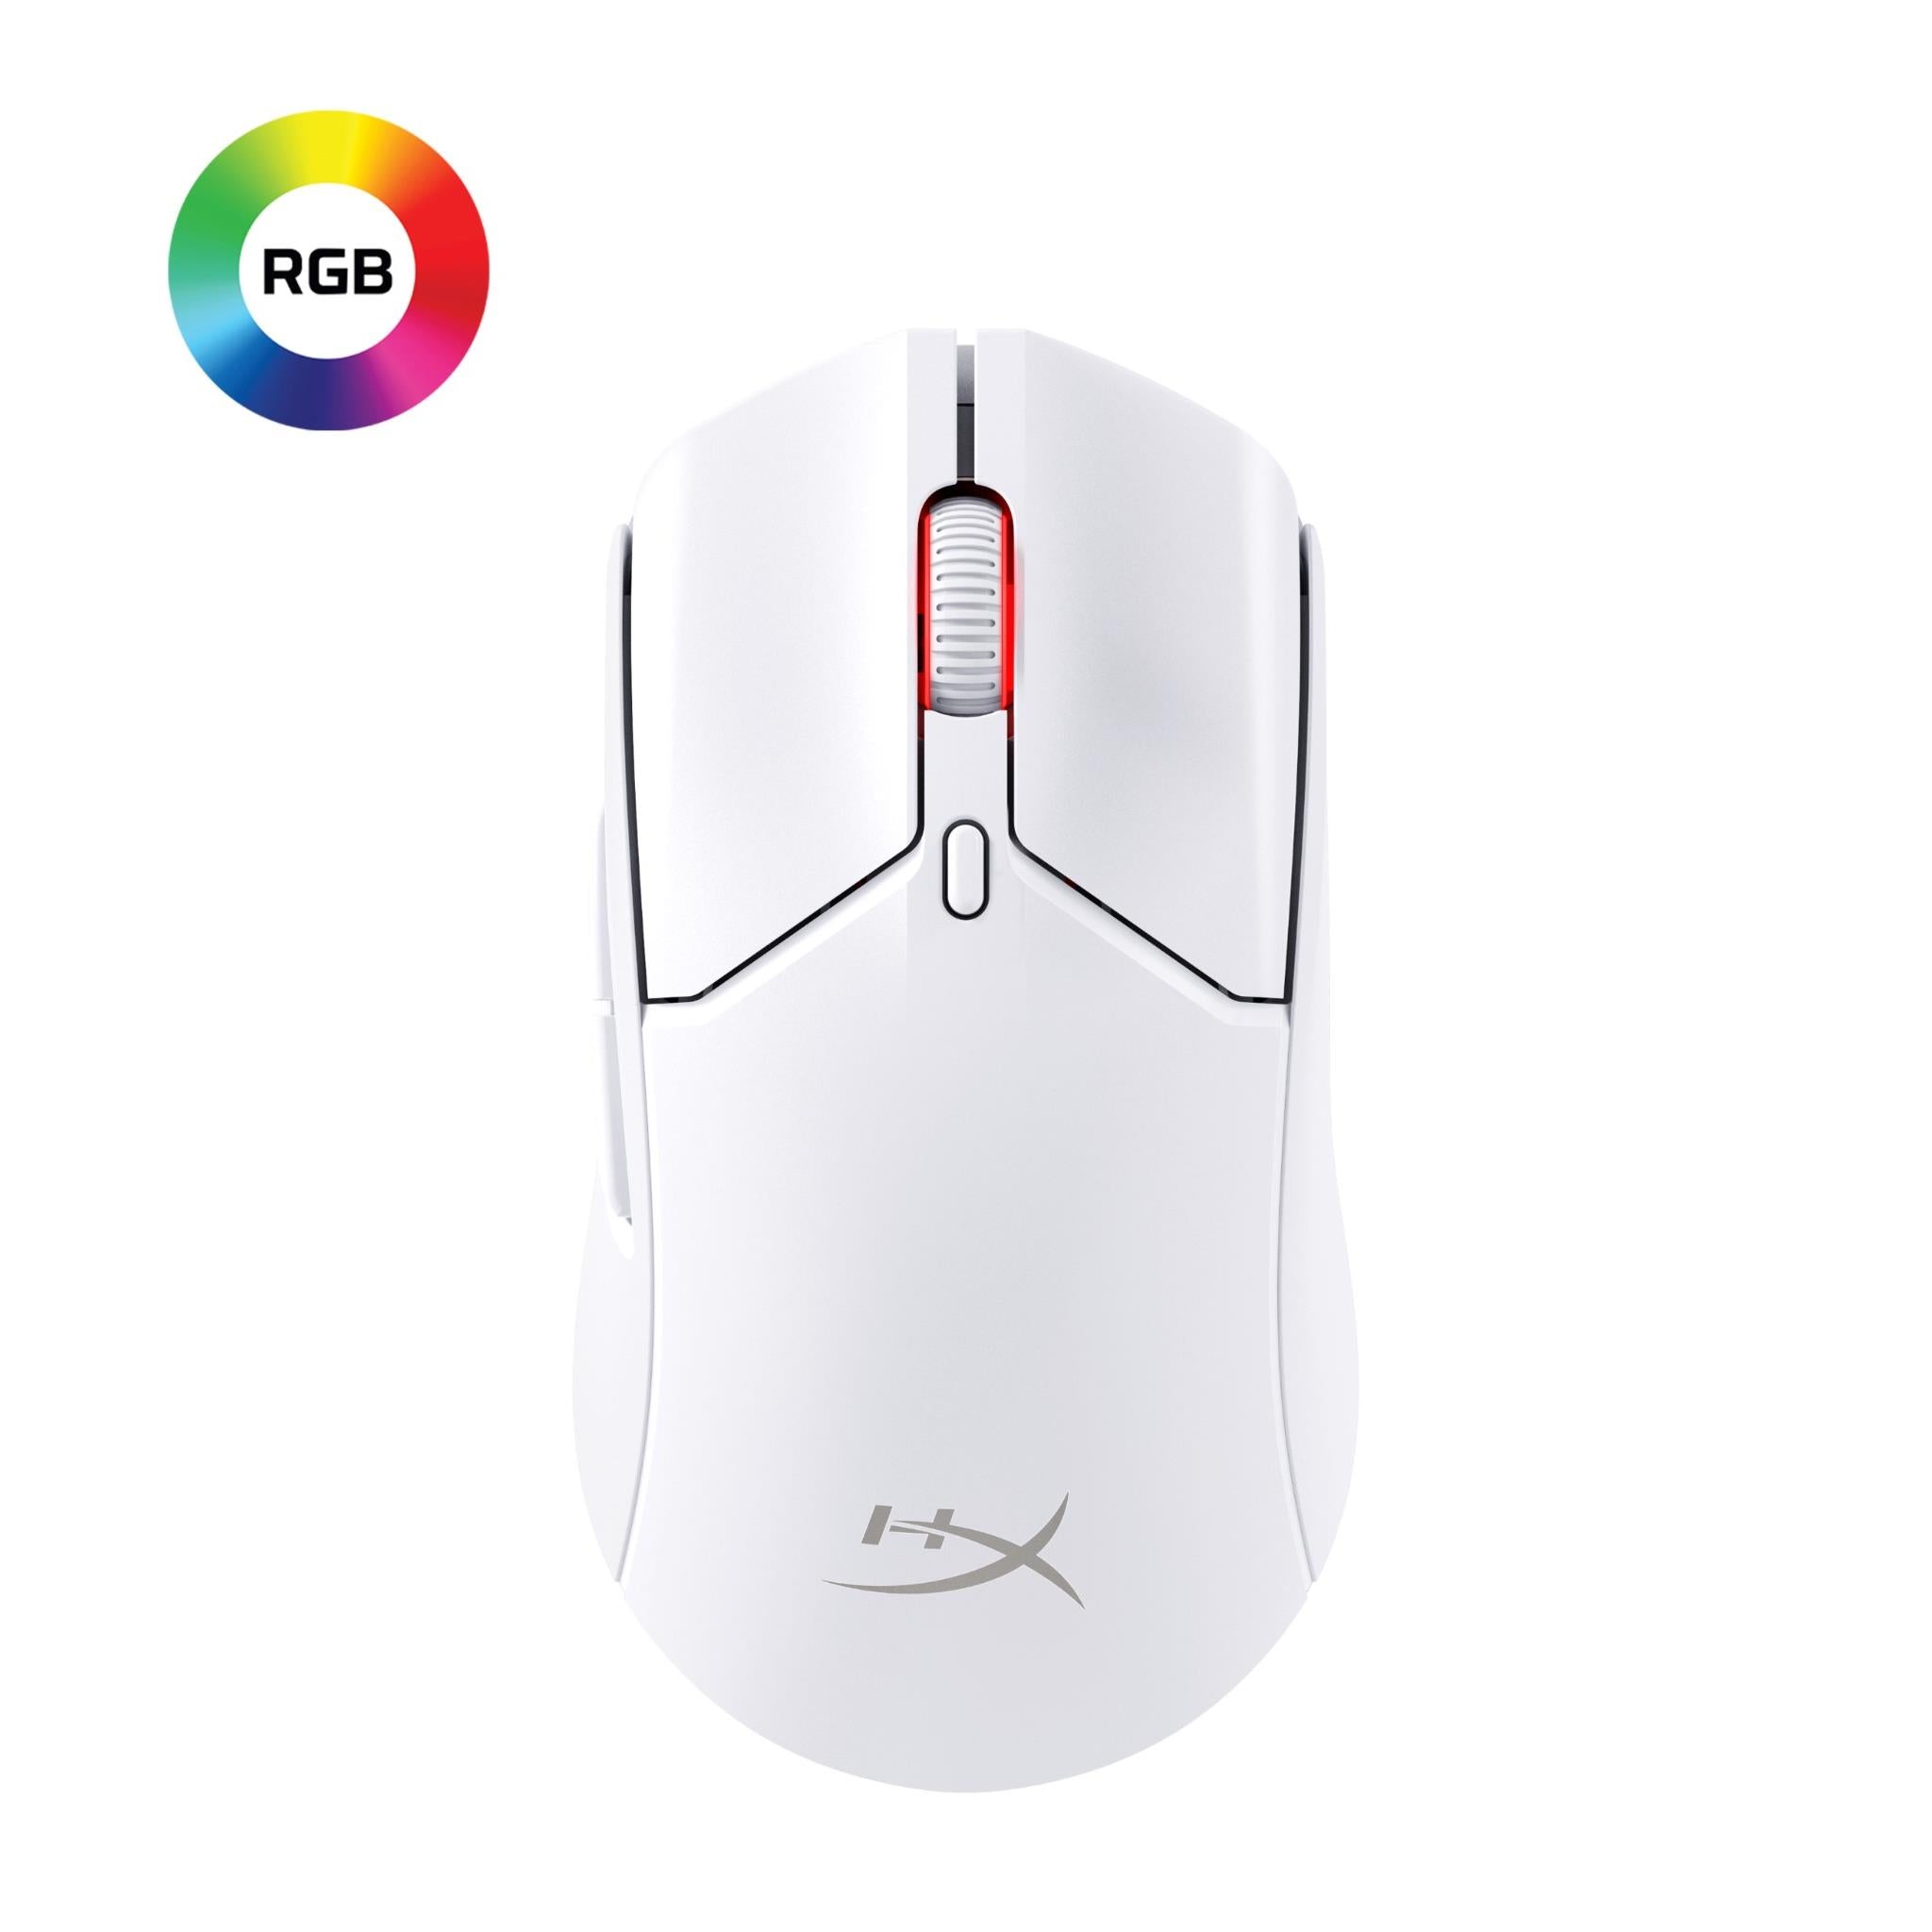 HyperX Pulsefire Haste Lightweight Wired Optical Gaming Mouse with